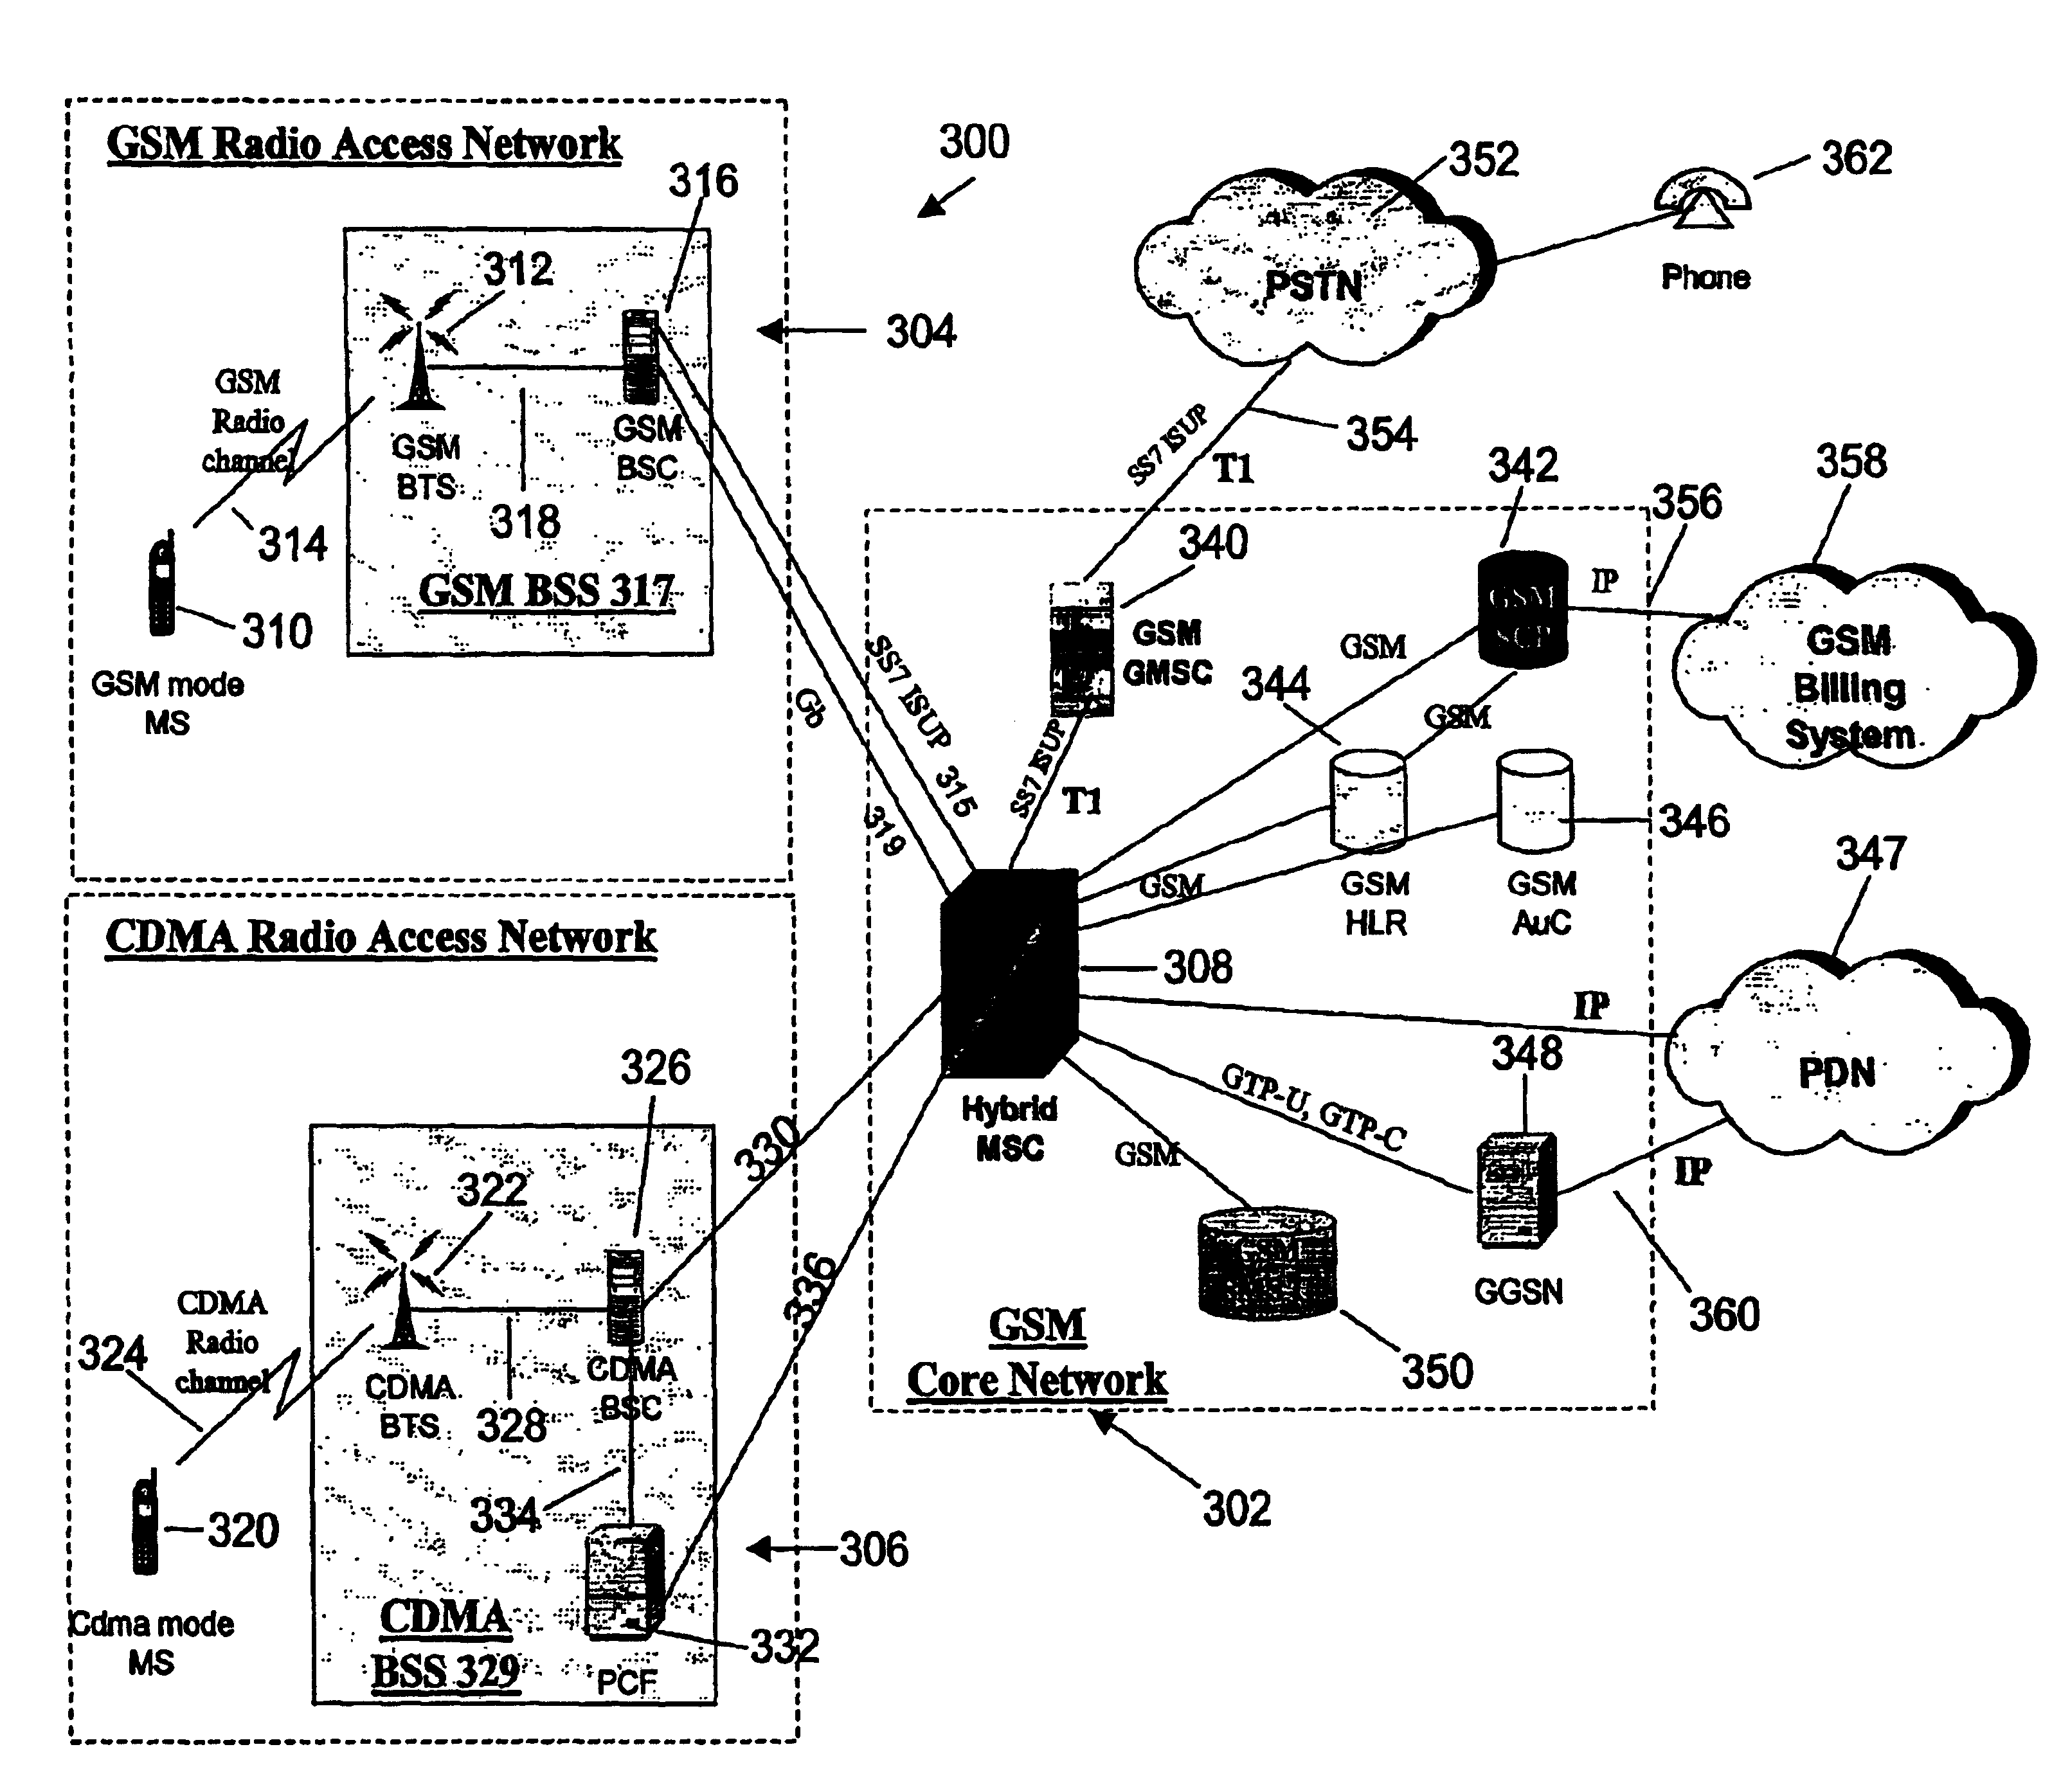 Method and system to send SMS messages in a hybrid network